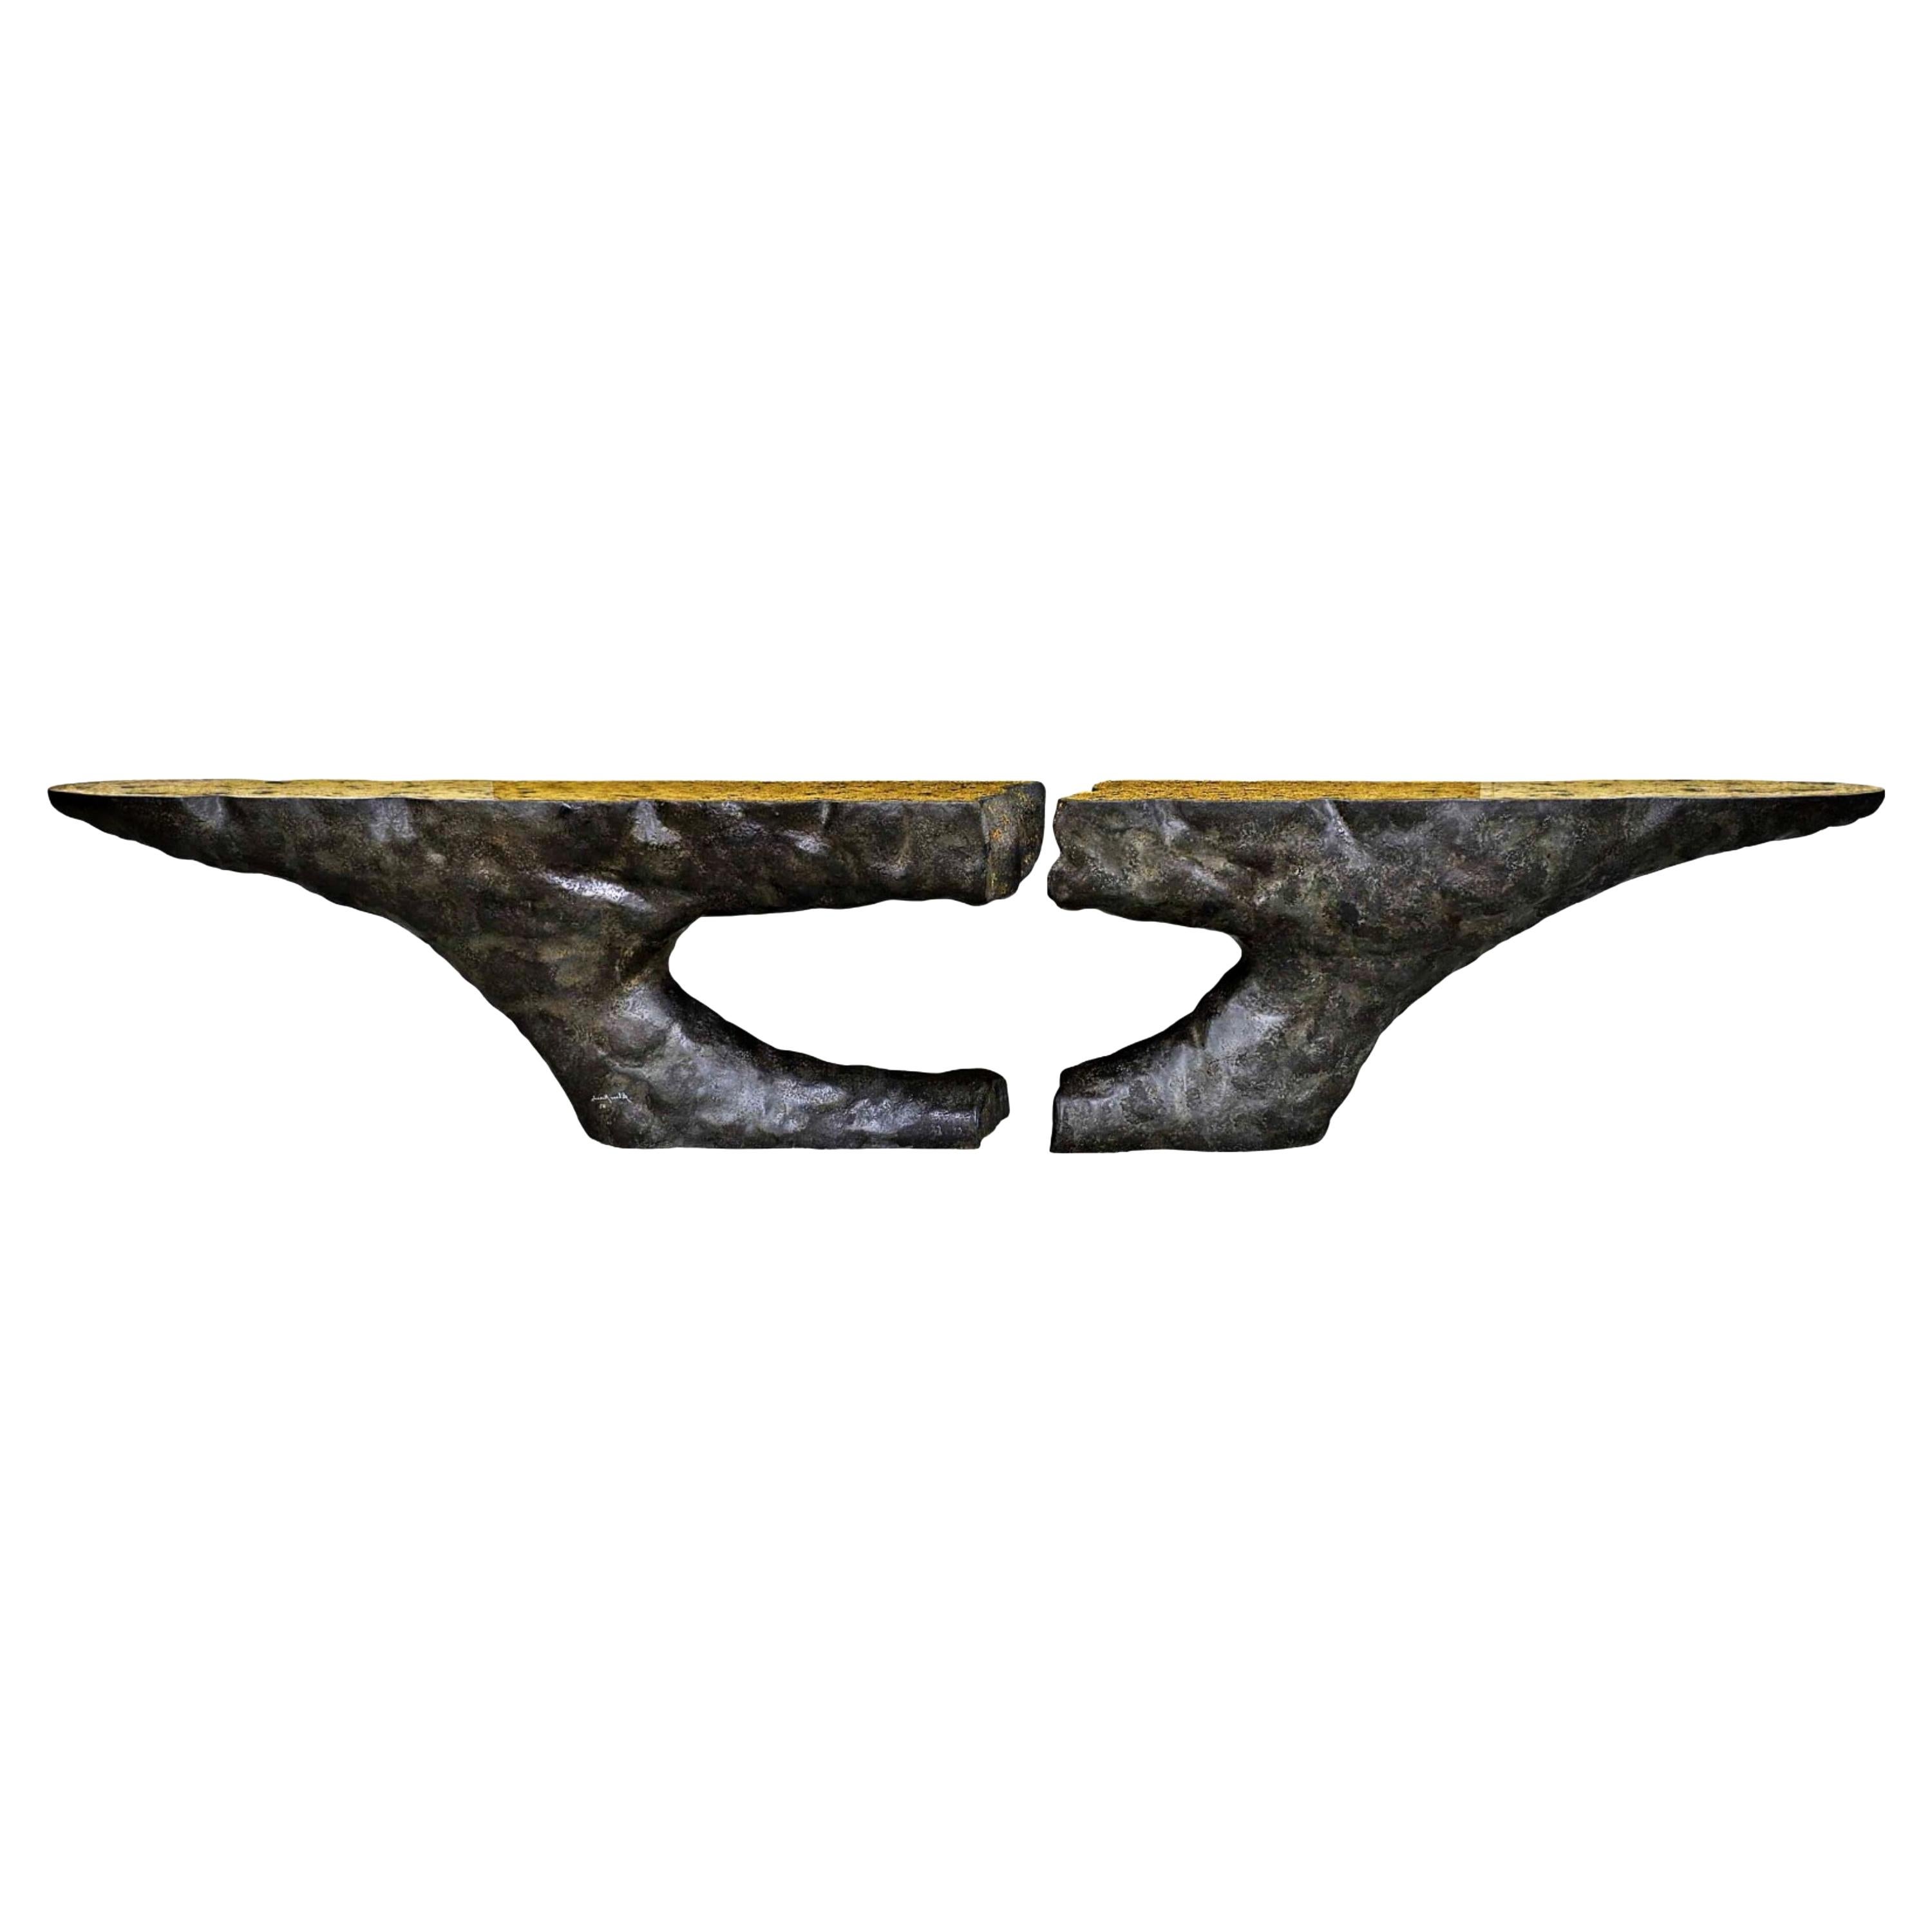 New Design Console in Resin Finished and Textured in "Vulcanic Rock" For Sale